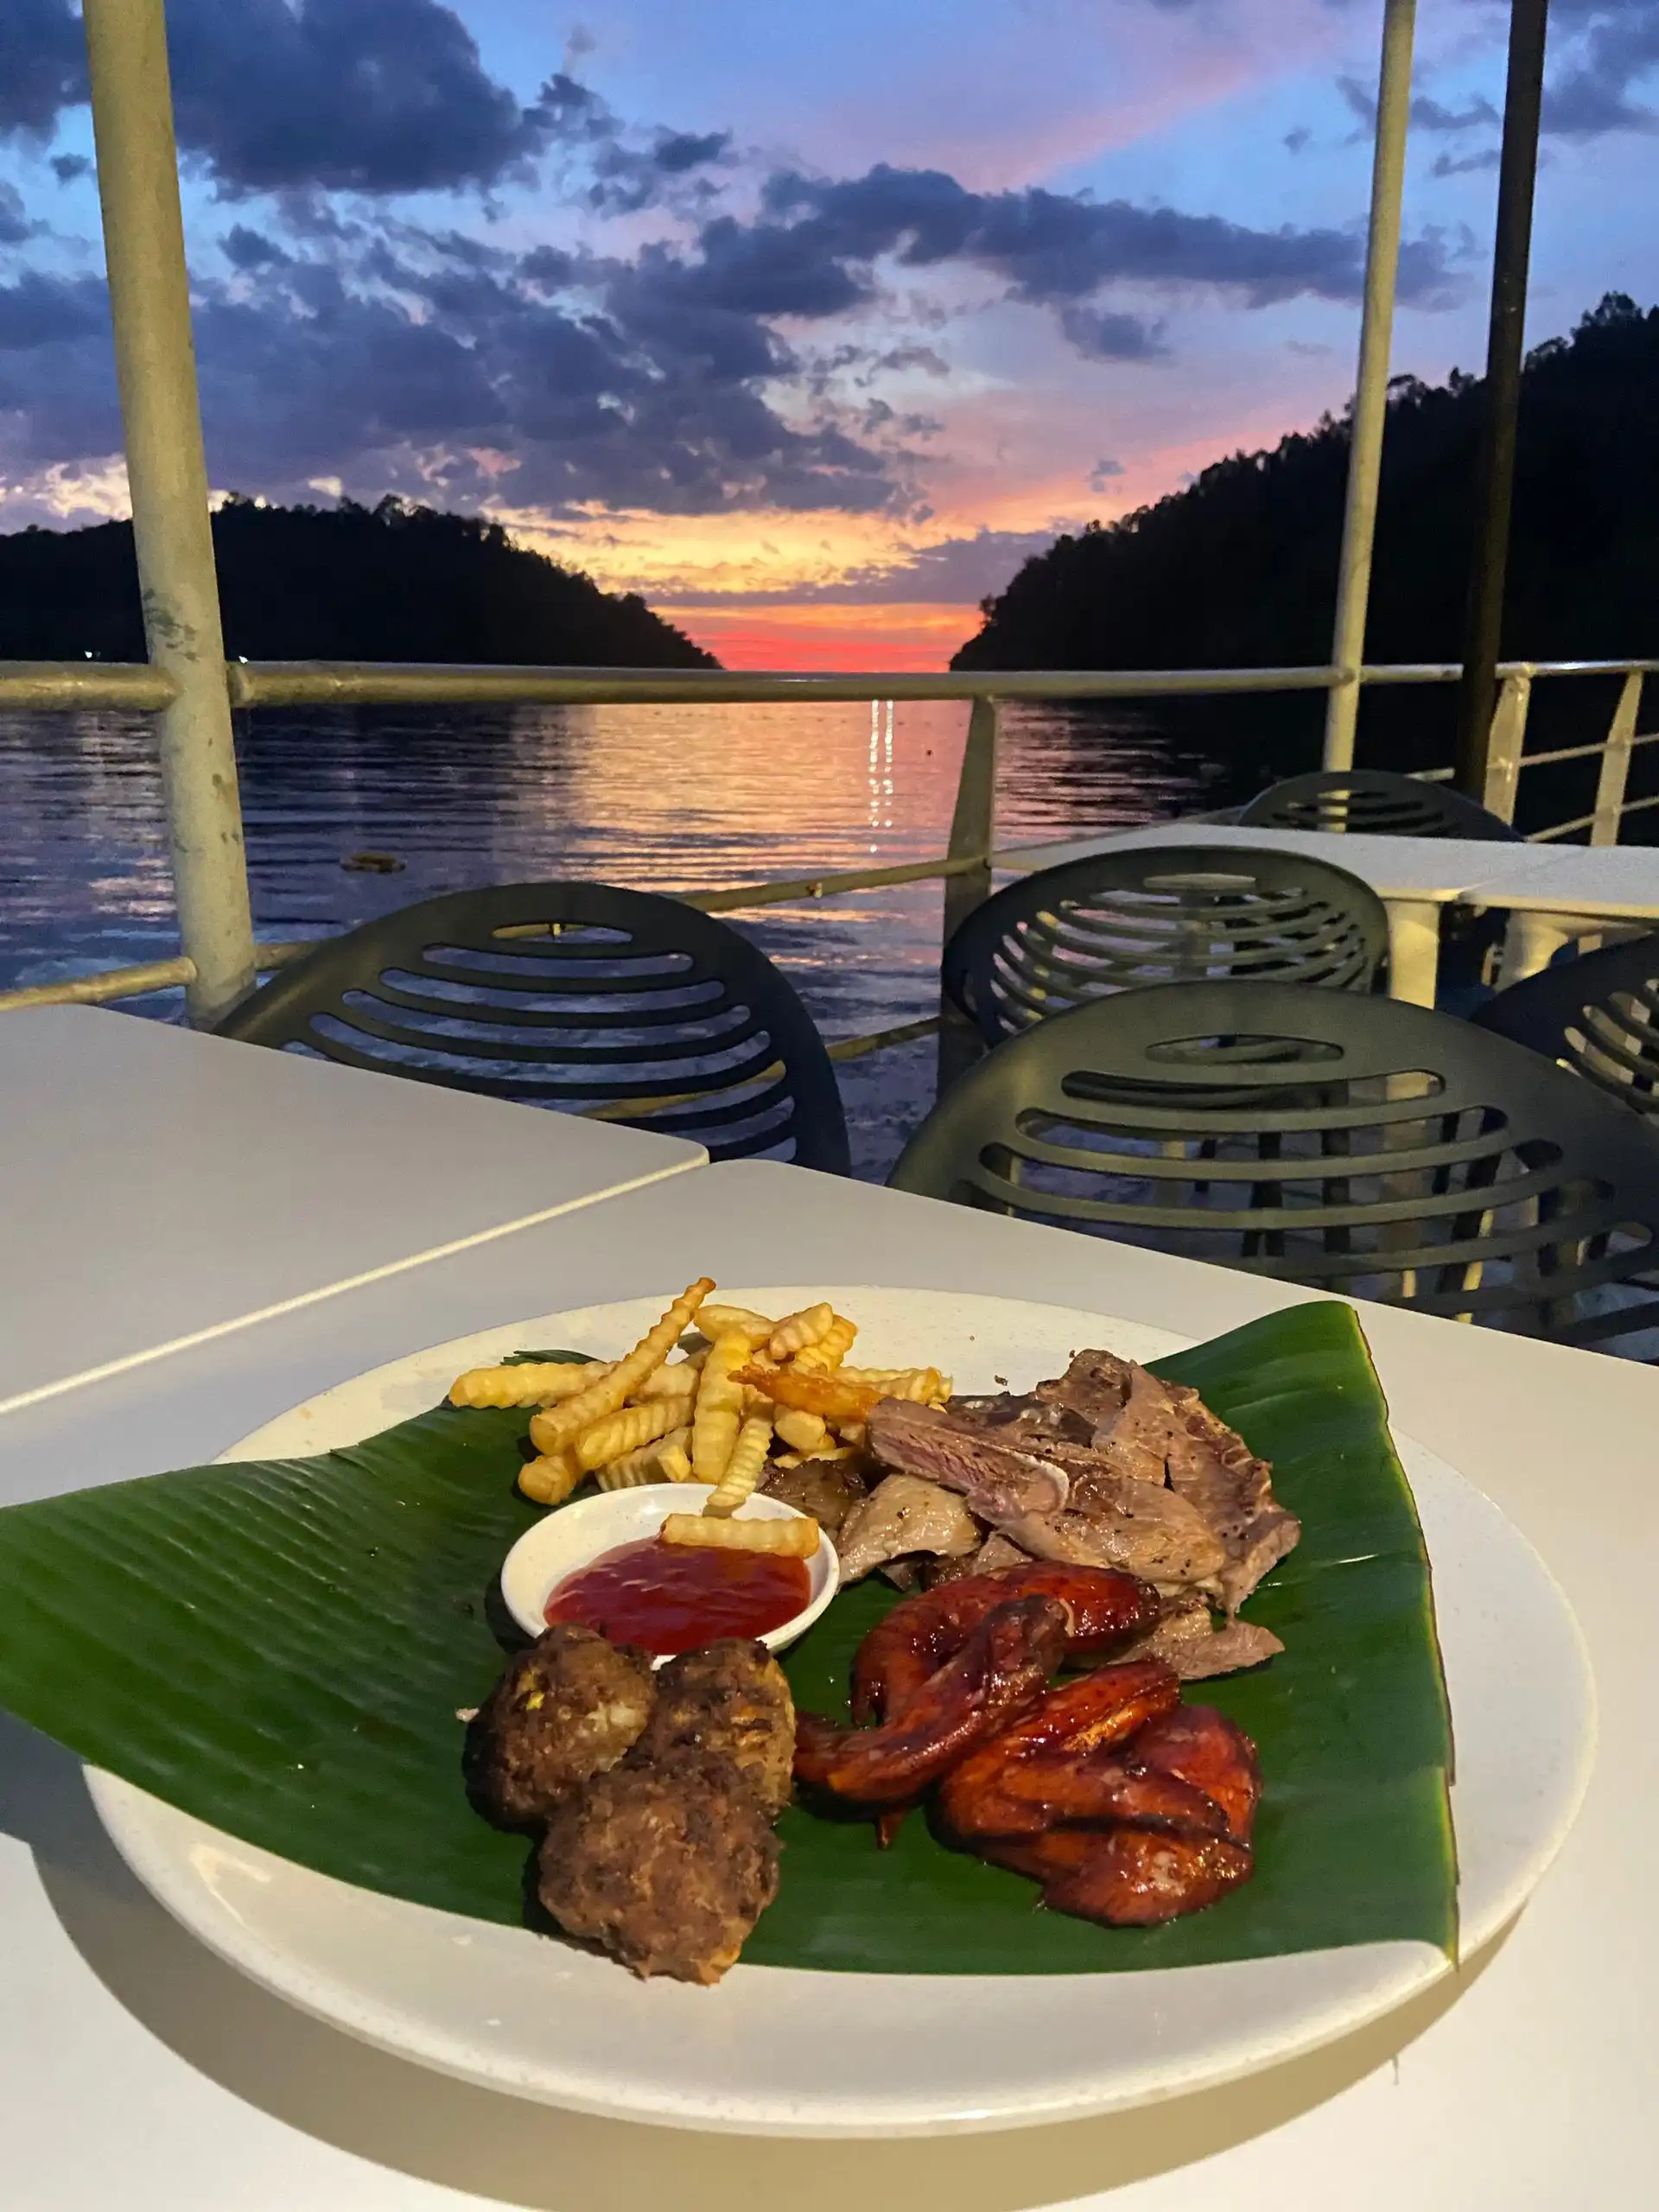 Dinner plate with grilled meats, fries, and sauce on a banana leaf, overlooking a sunset by the water.